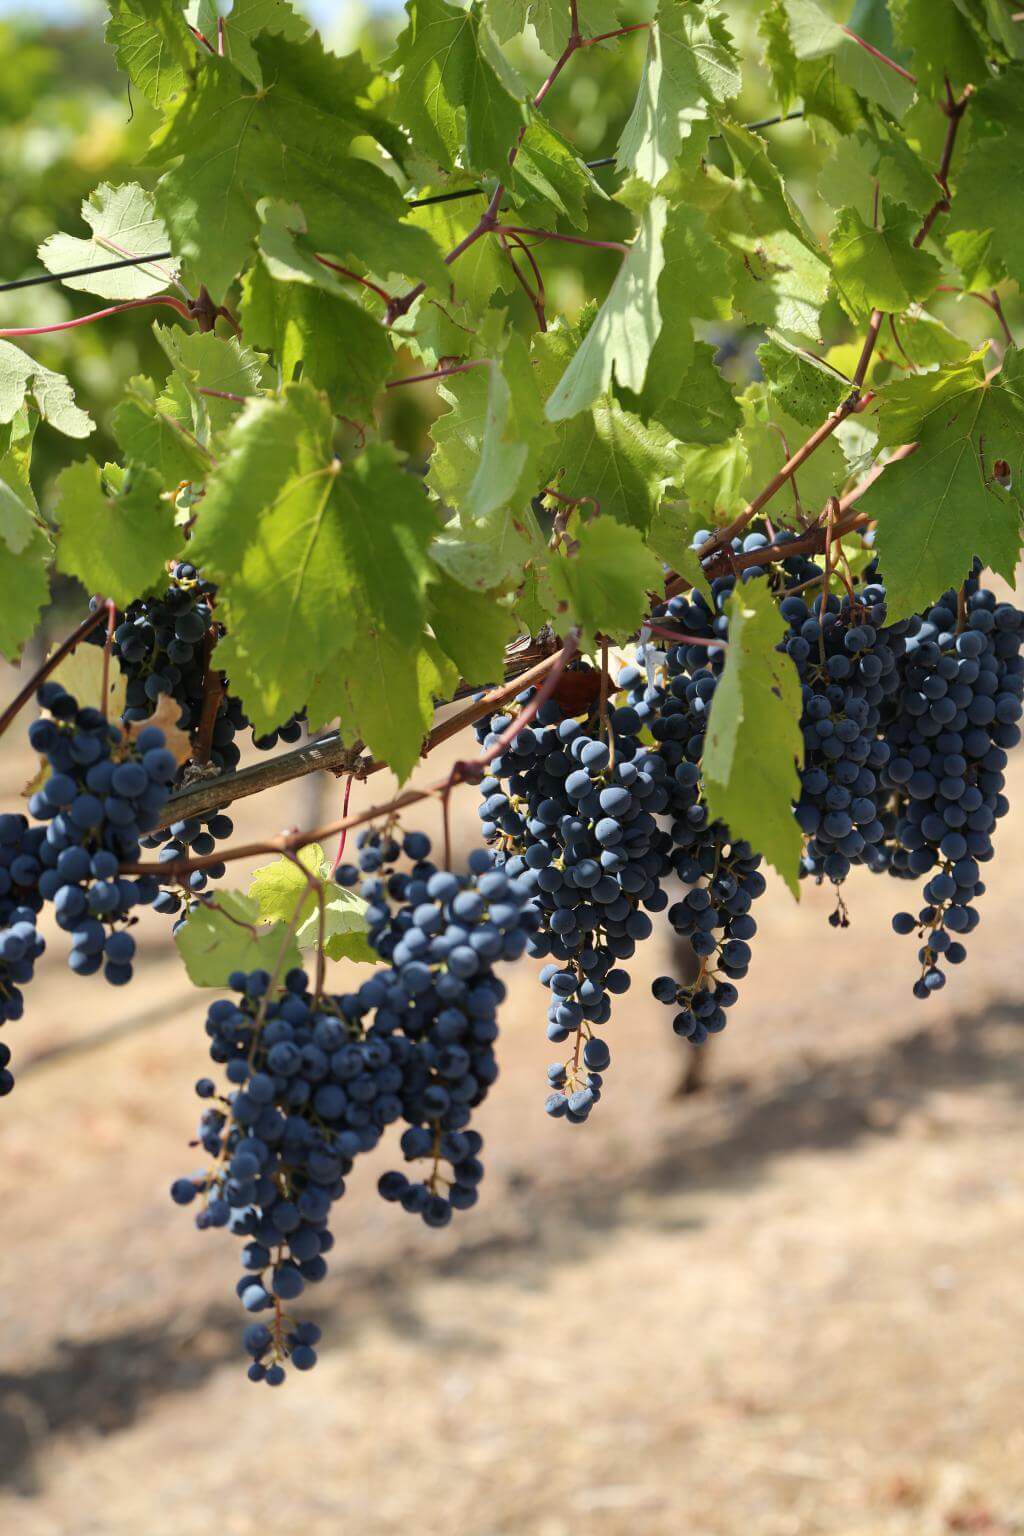 GRAPE HARVESTS HAVE TO BE PLANNED